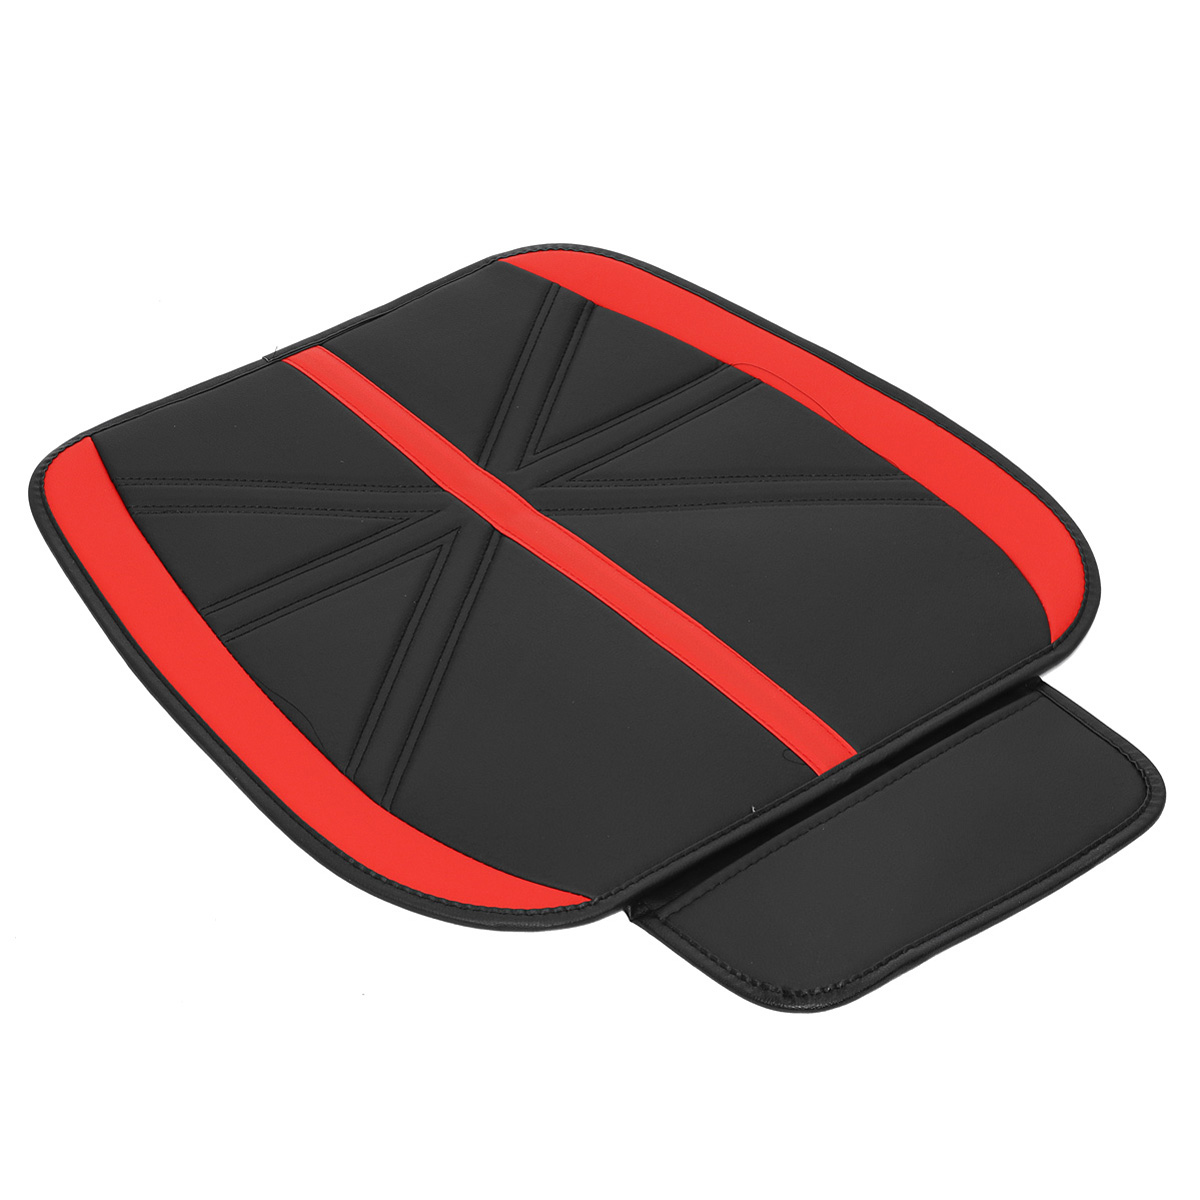 Universal PU Leather Breathable Cushion Pad Car Front Seat Mat Protector Cover Organizer